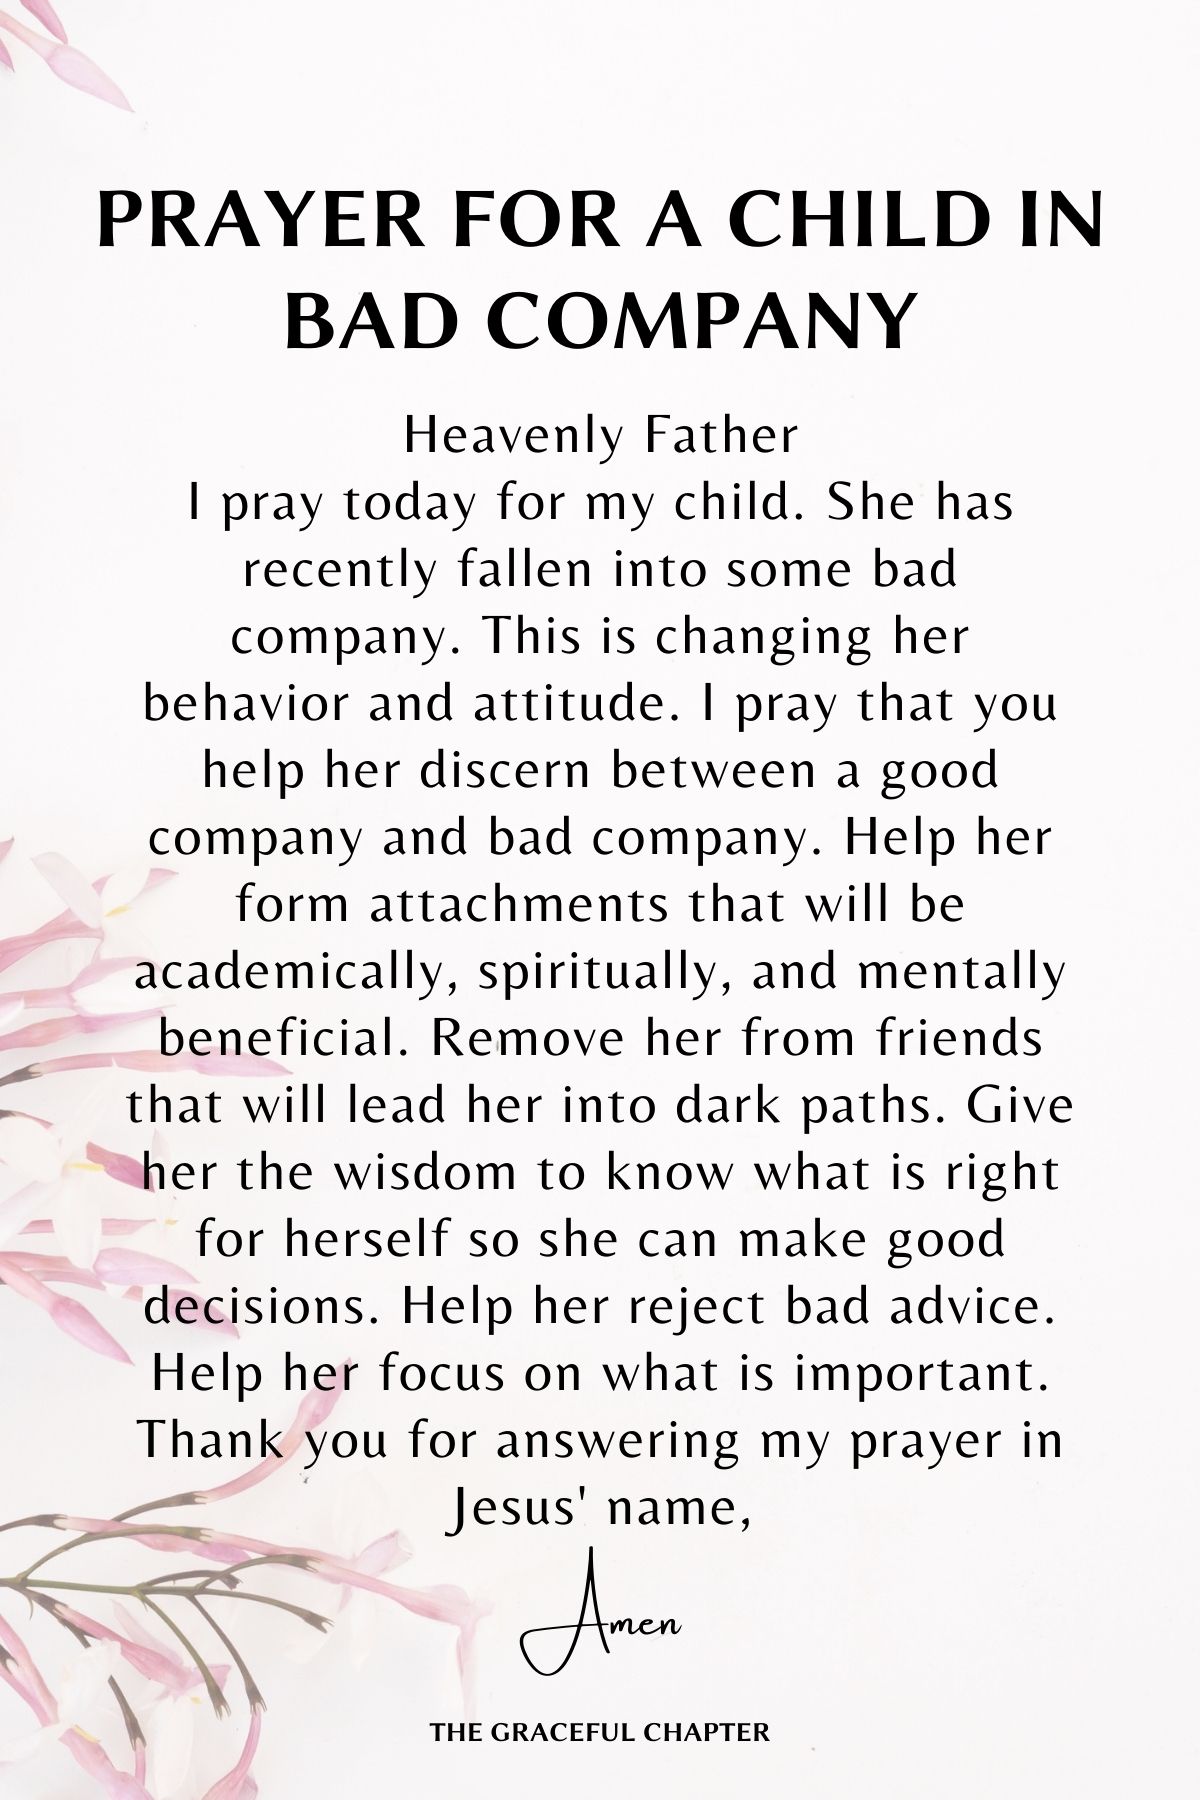 Prayer for a child in bad company